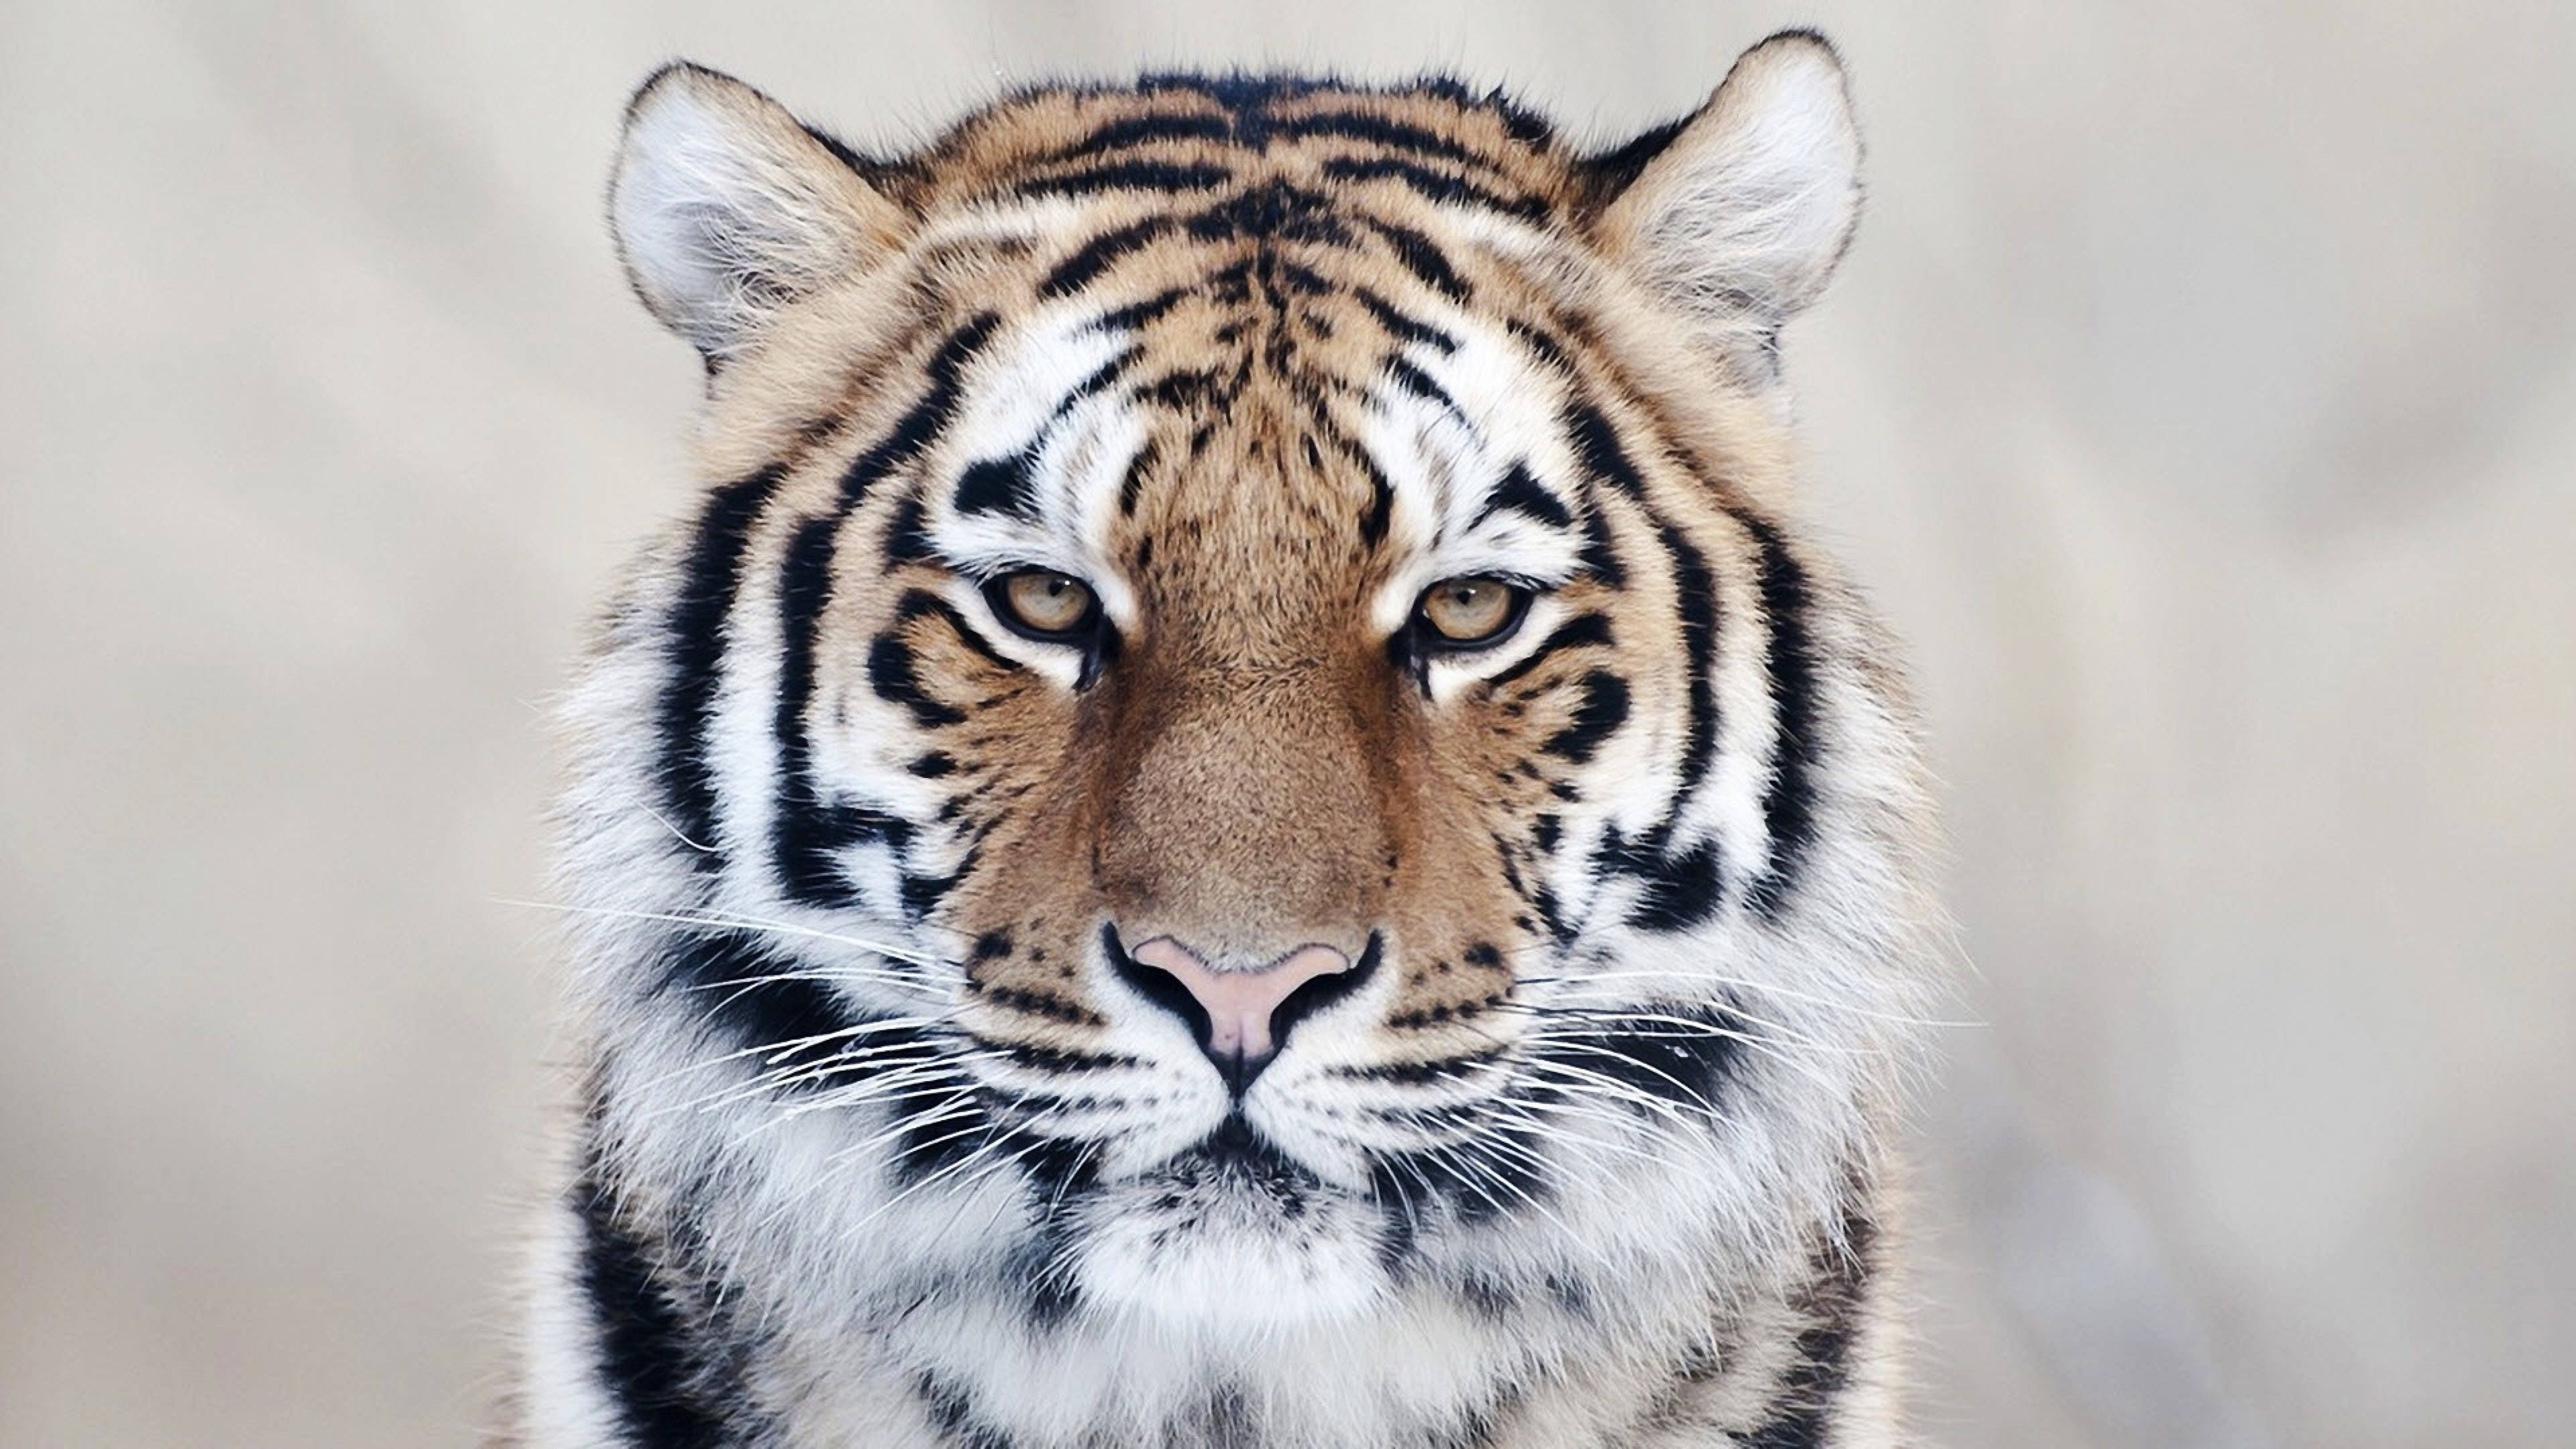 8k Tiger Uhd With Fierce Gaze Picture